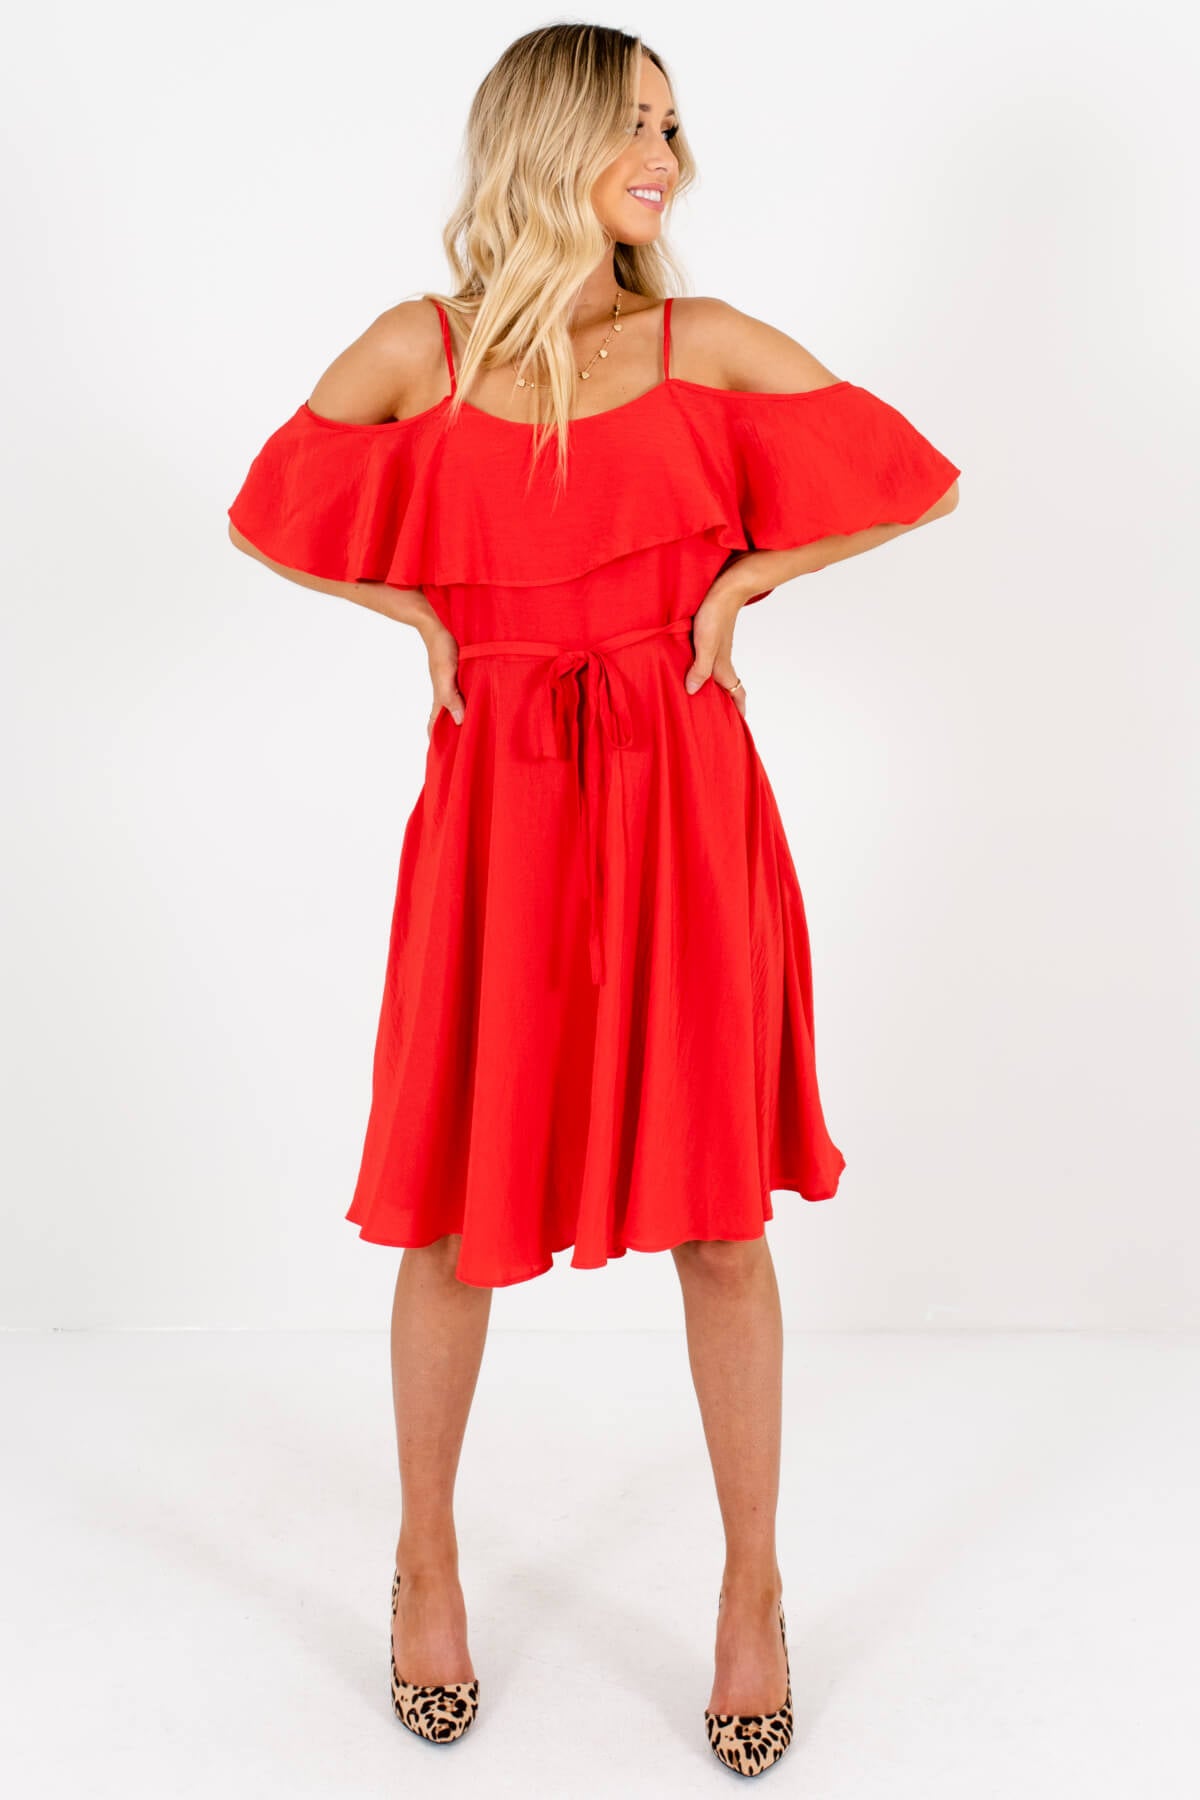 Red Waist Tie Detail Boutique Knee-Length Dresses for Women